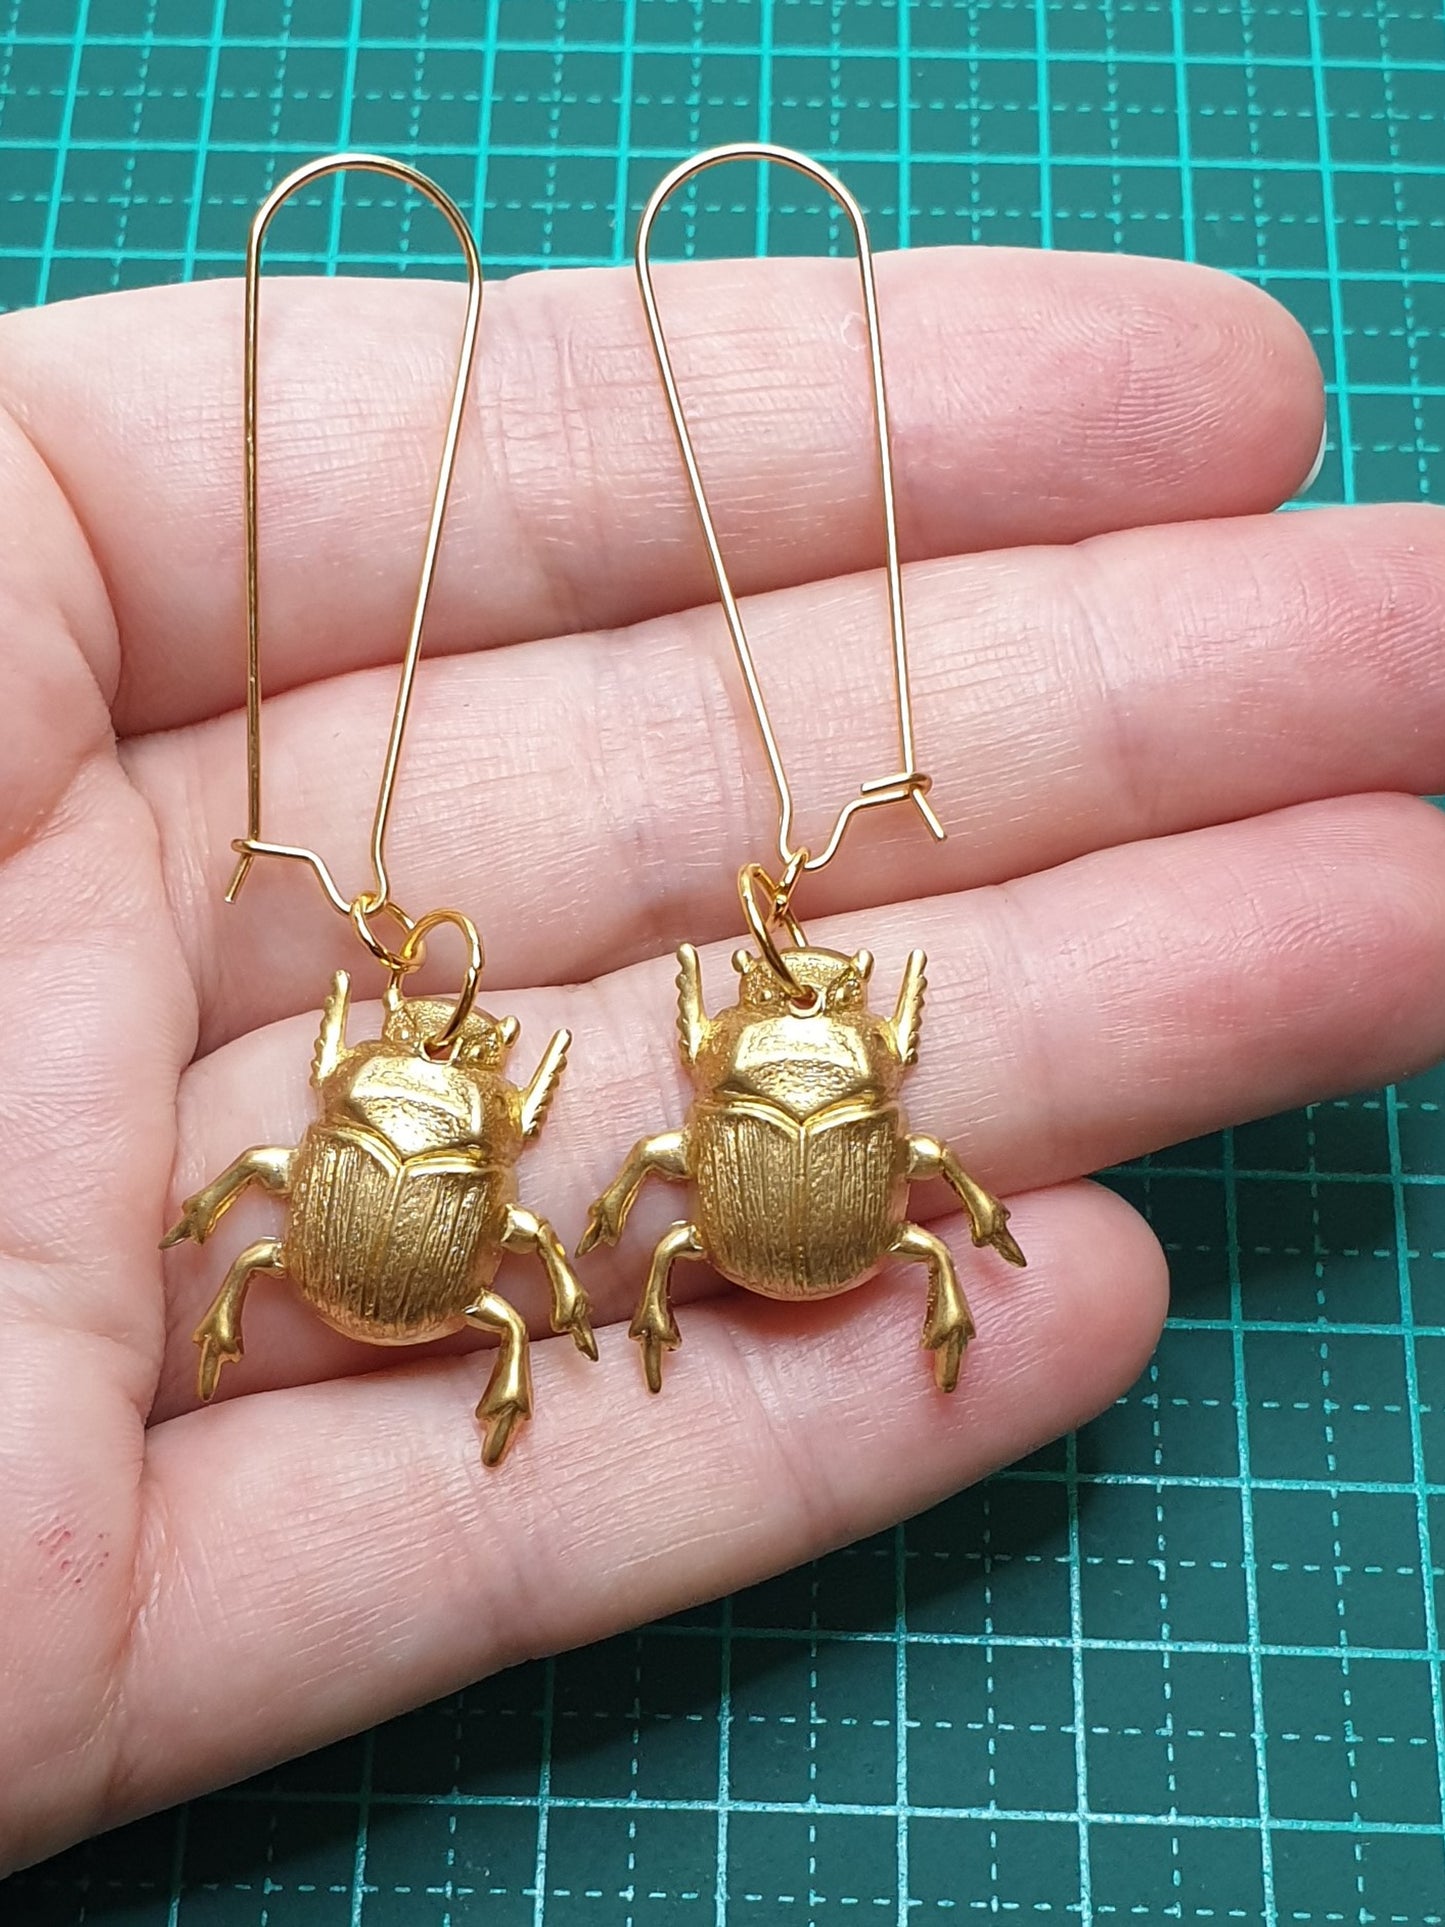 Dung Beetles on long hooks - Brass & Stainless Steel